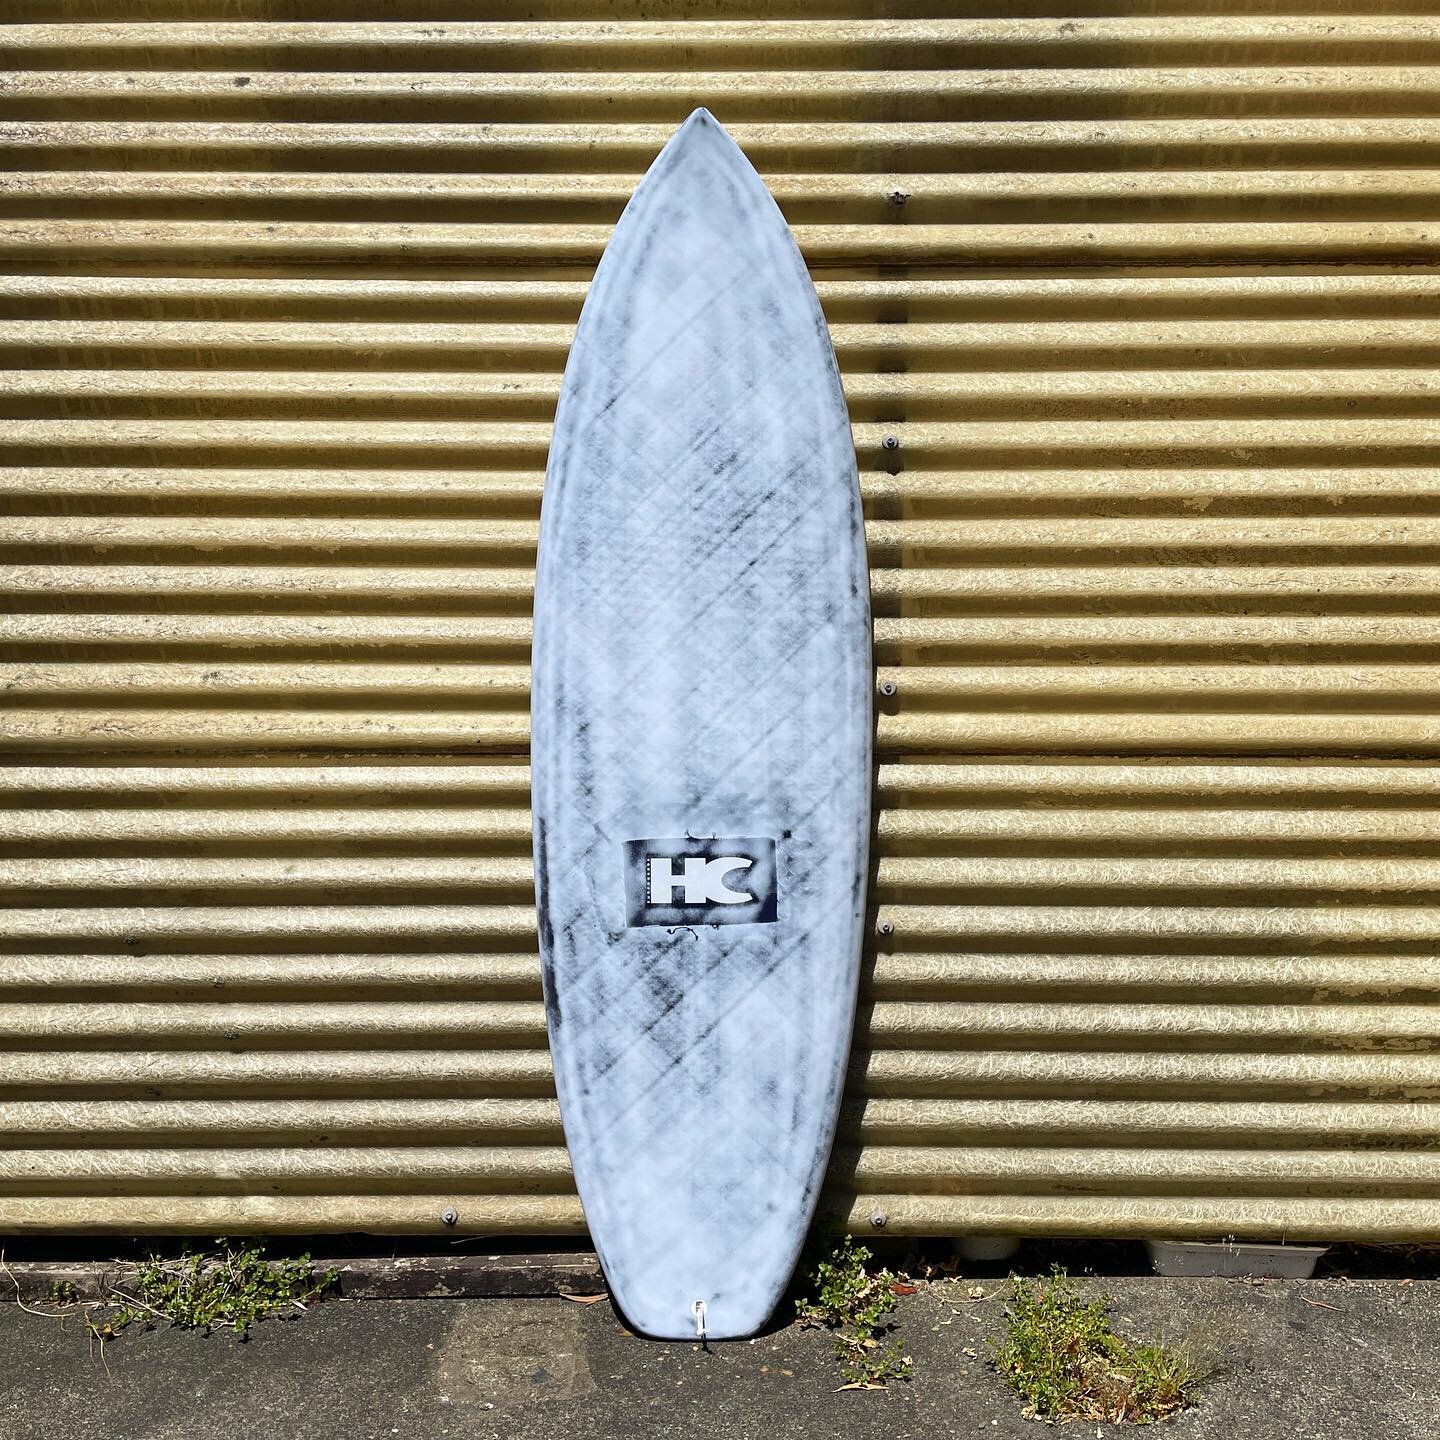 6&rsquo;0&rdquo; Carbon Epoxy Rumpsteak. This one is going to @dropinsupply in Kaitaia, if you are in the far north pop in and check it out!